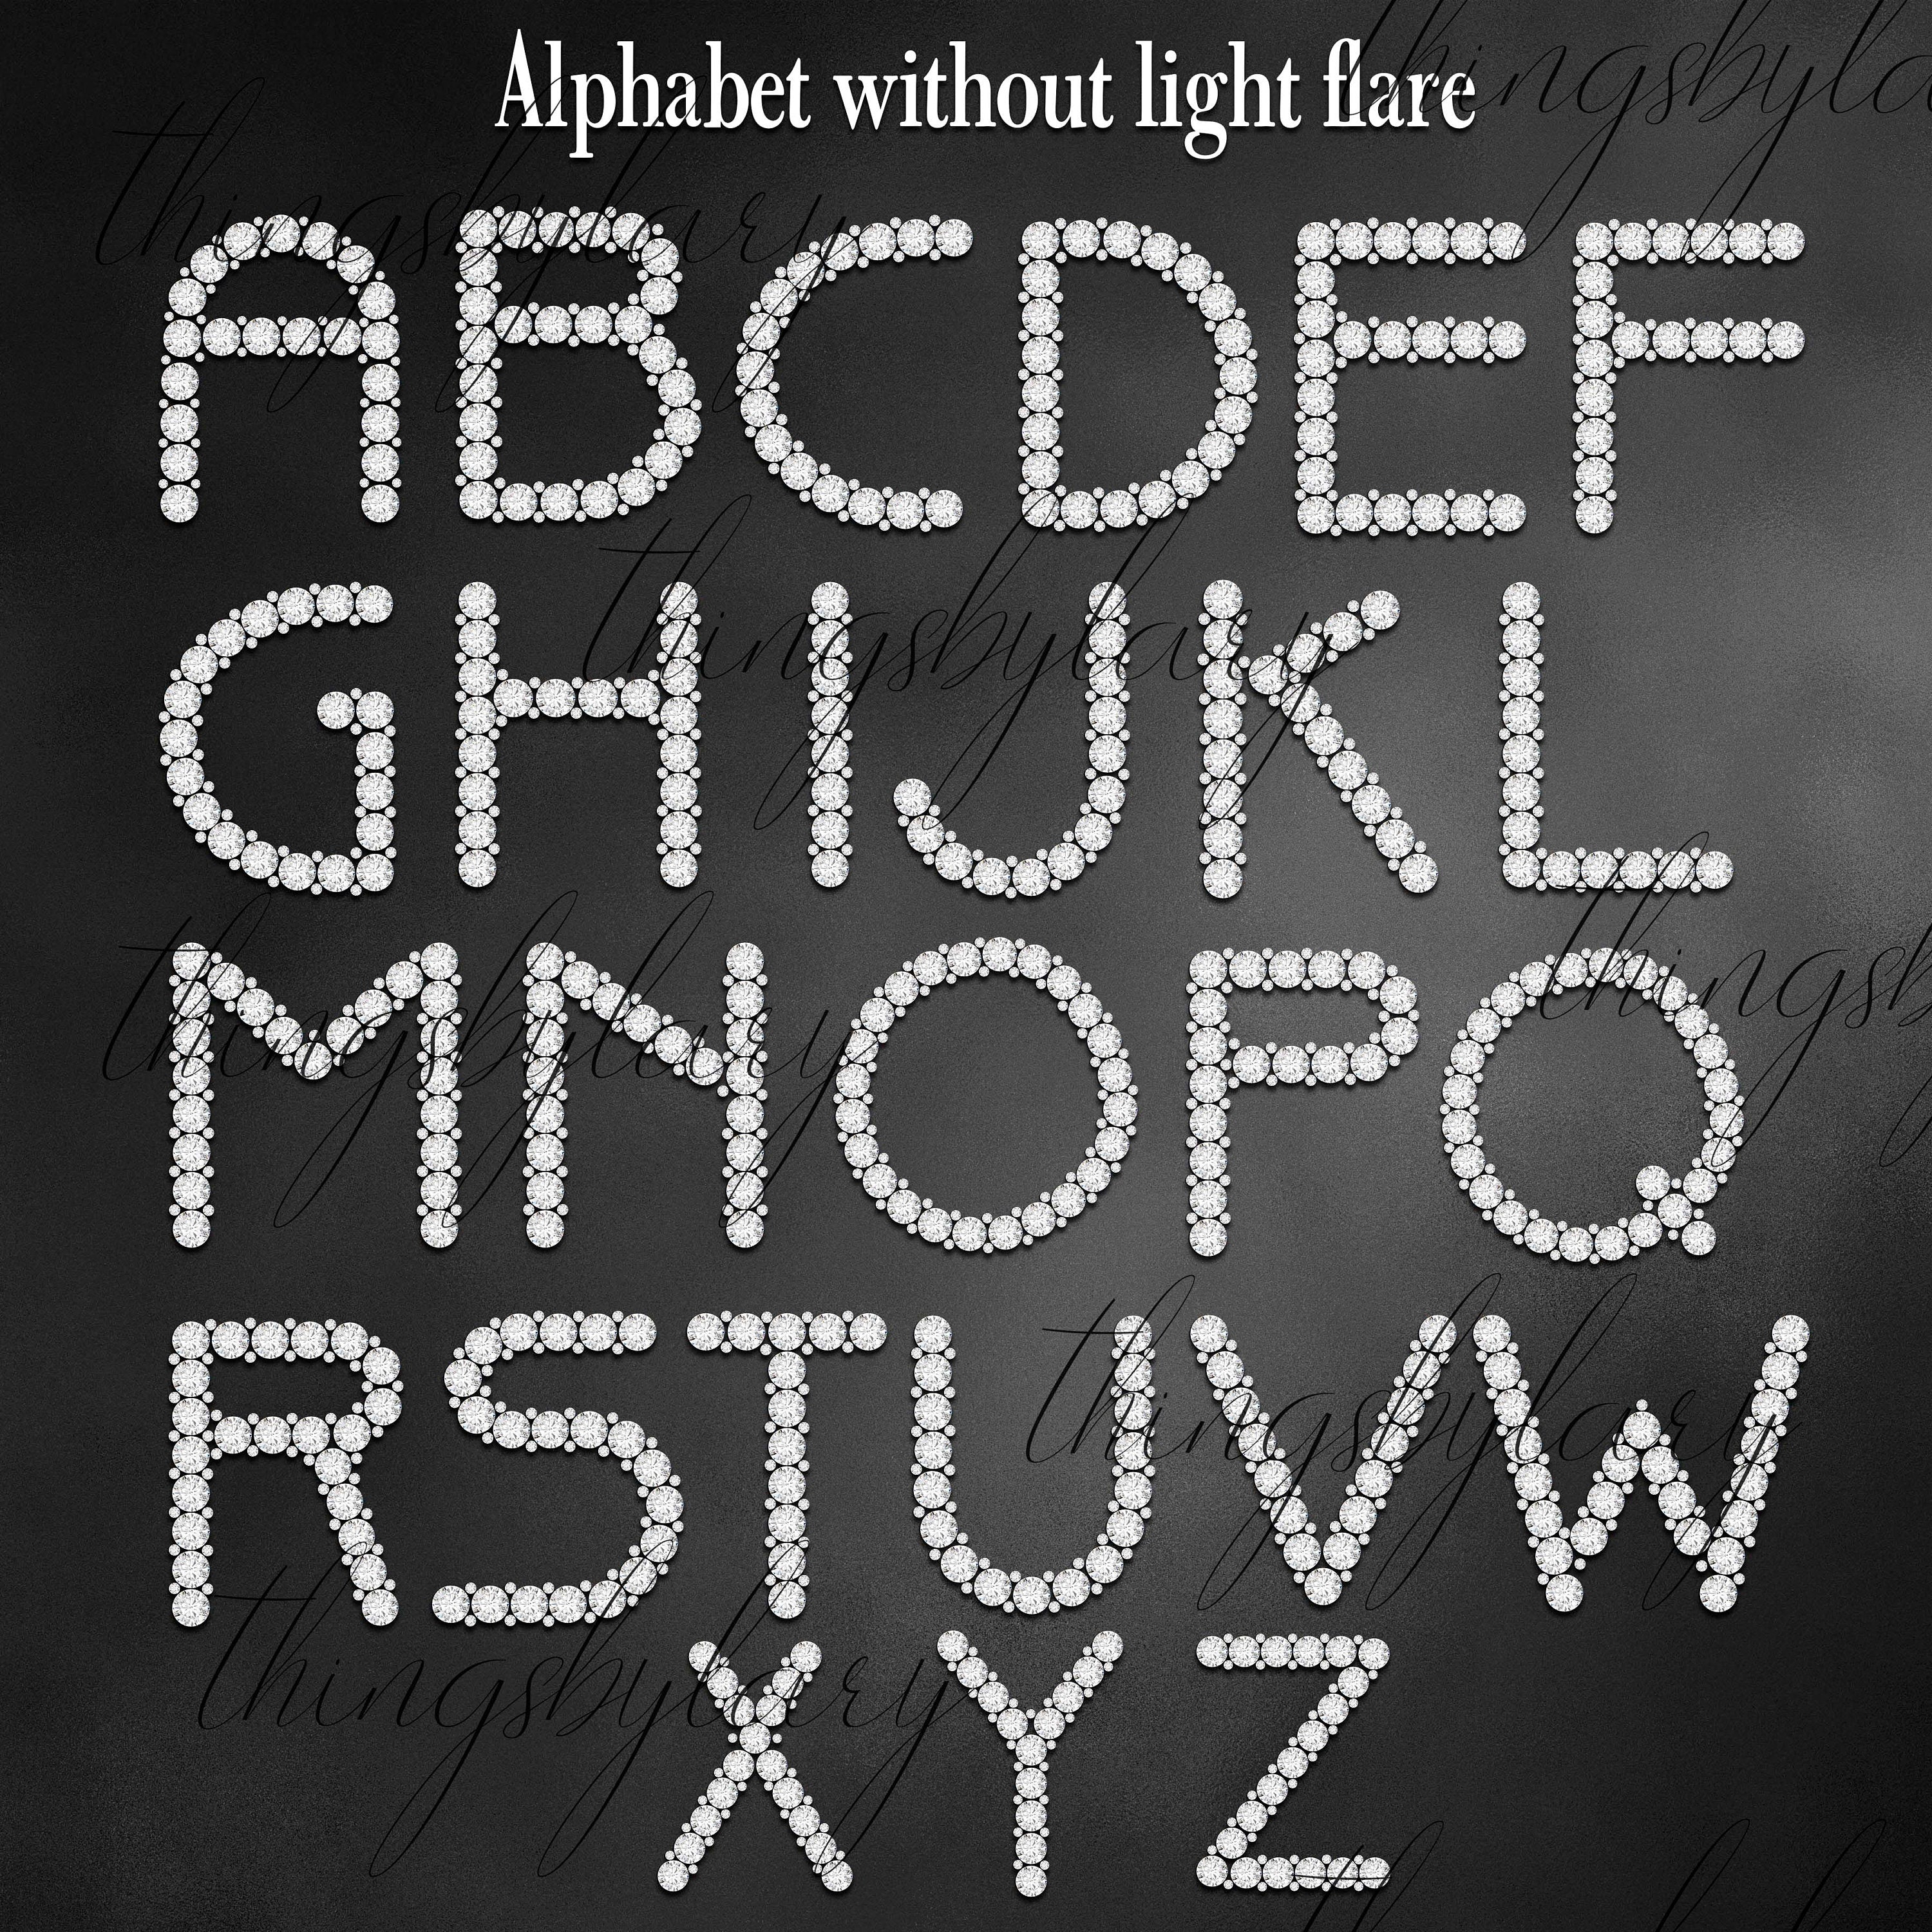 81 Diamond Alphabet Number Symbol Clip Arts (NOT FONT) 300 Dpi PNG Instant Download Commercial Use White Diamond Overlay Number Symbol